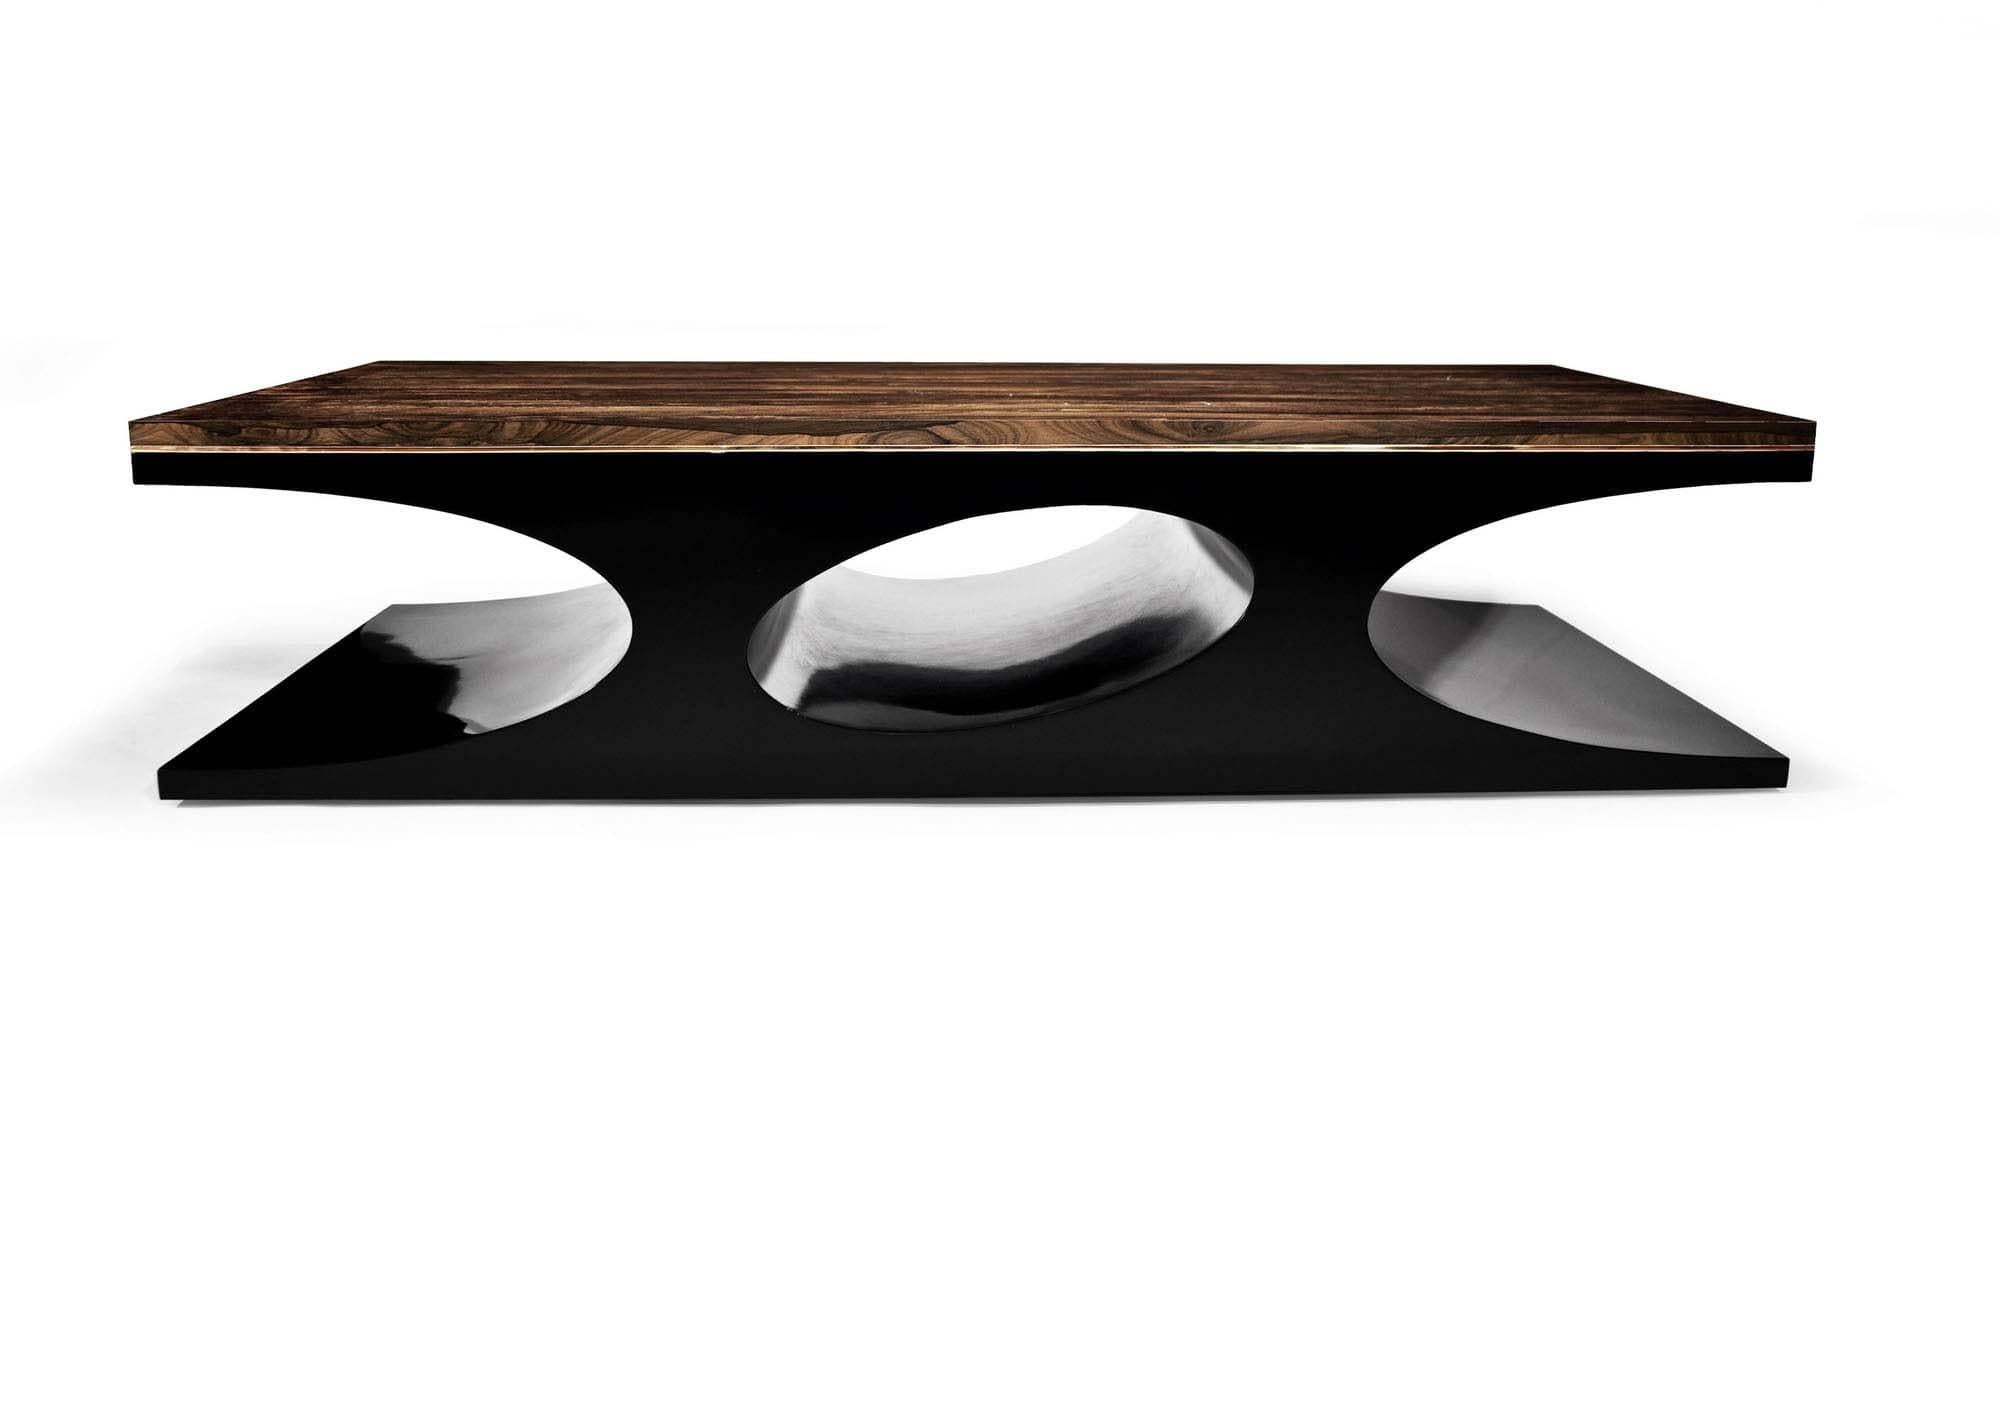 The Volcano Table comprises of High gloss H9 wood top, jeweled and welded bronze trimming, eloquently designed on a black lacquer base. The bold, sleek curvature of the hollowed base paired with the Highly glossed H9 top results, in an explosive yet